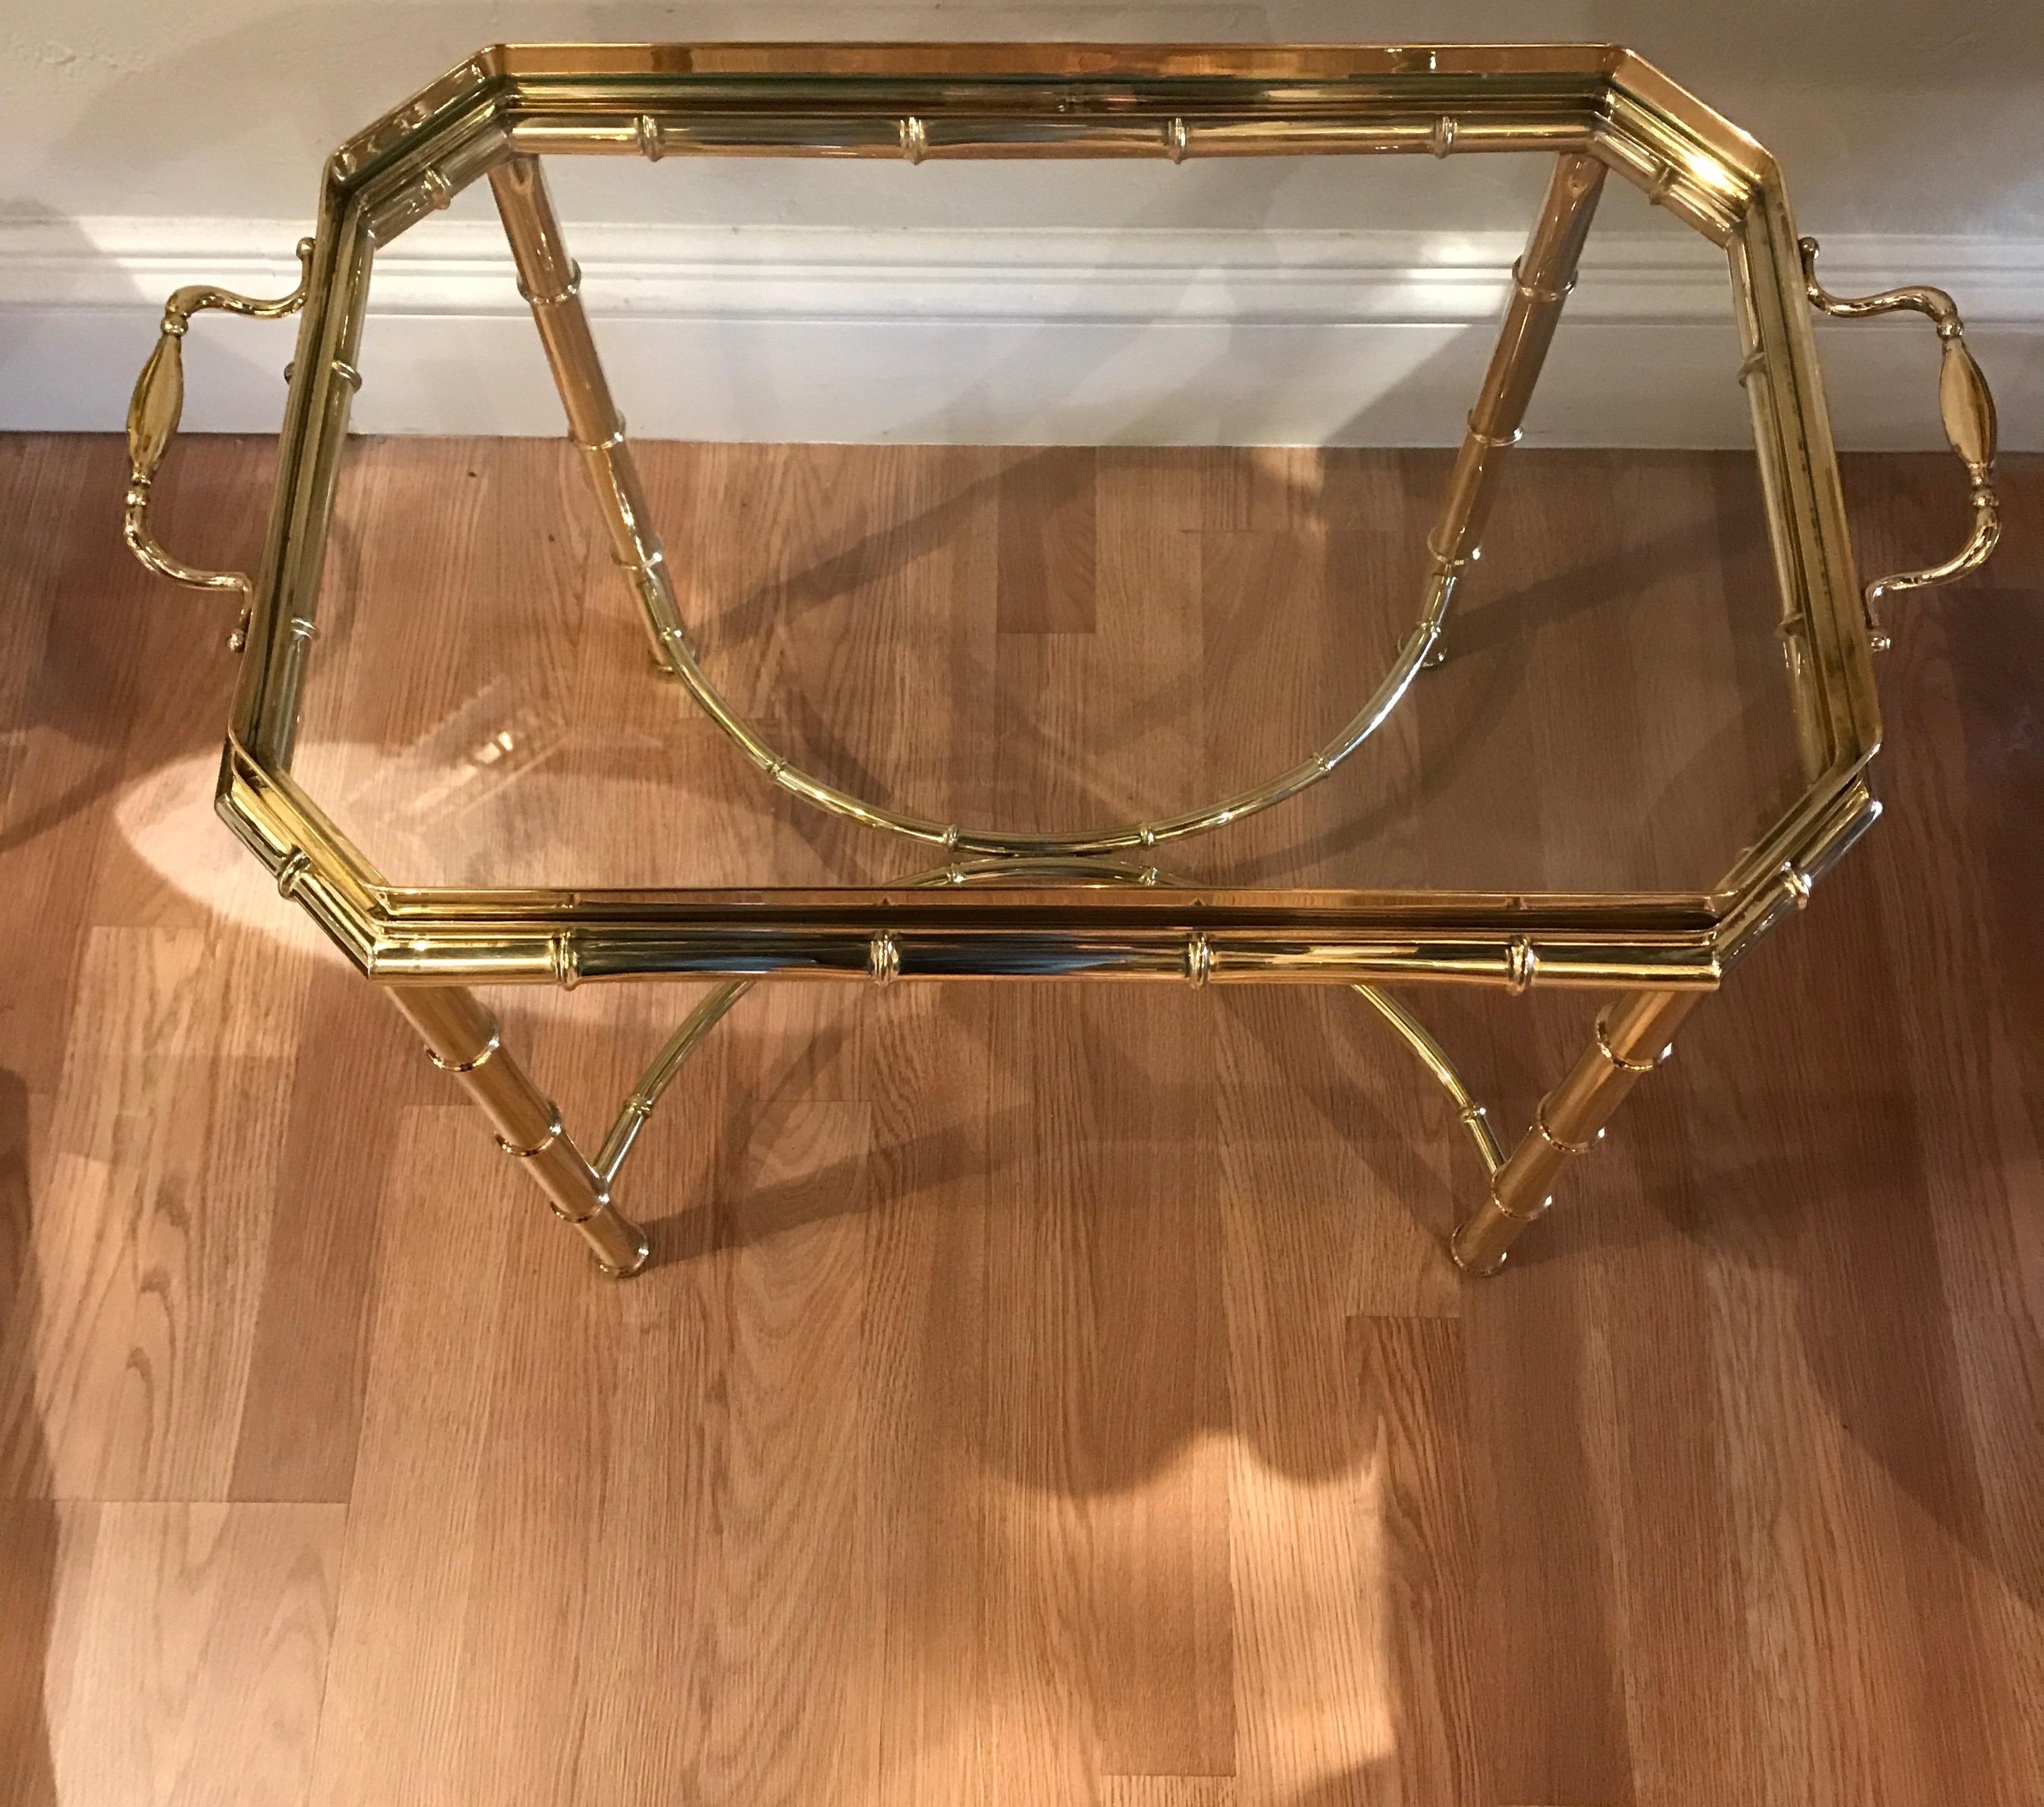 Polished brass faux bamboo tray table.